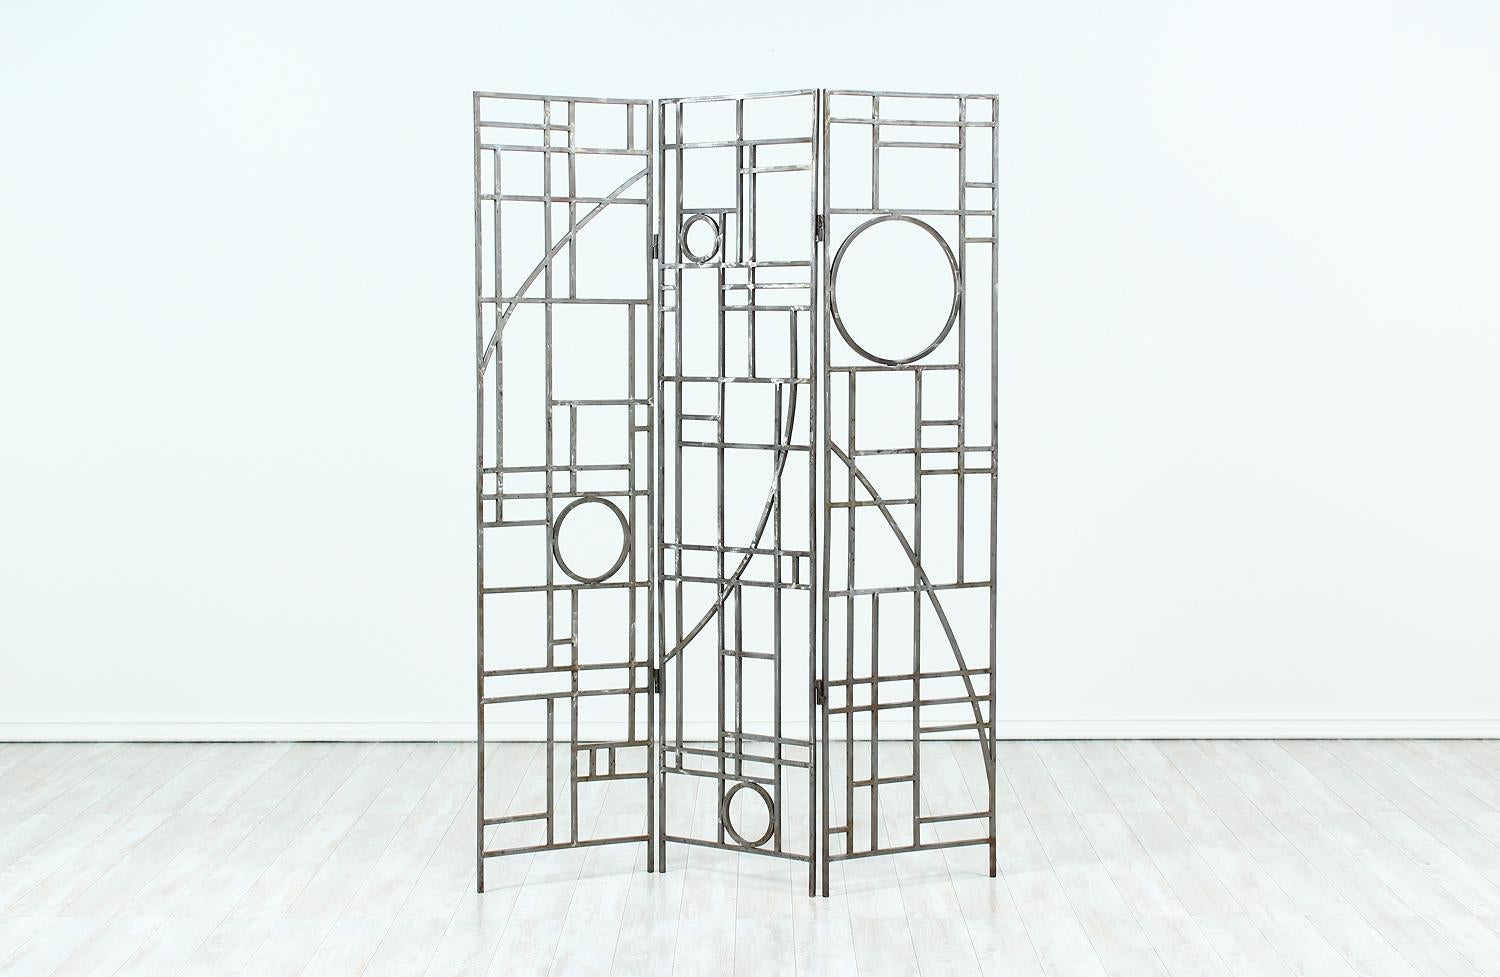 Post-Modern folding room divider designed by Robert Sonneman for George Kovacs in the United States circa 1990s. This functional design features a quality crafted brushed metal frame adorned with geometric shapes that reflect a mix of Art Deco and